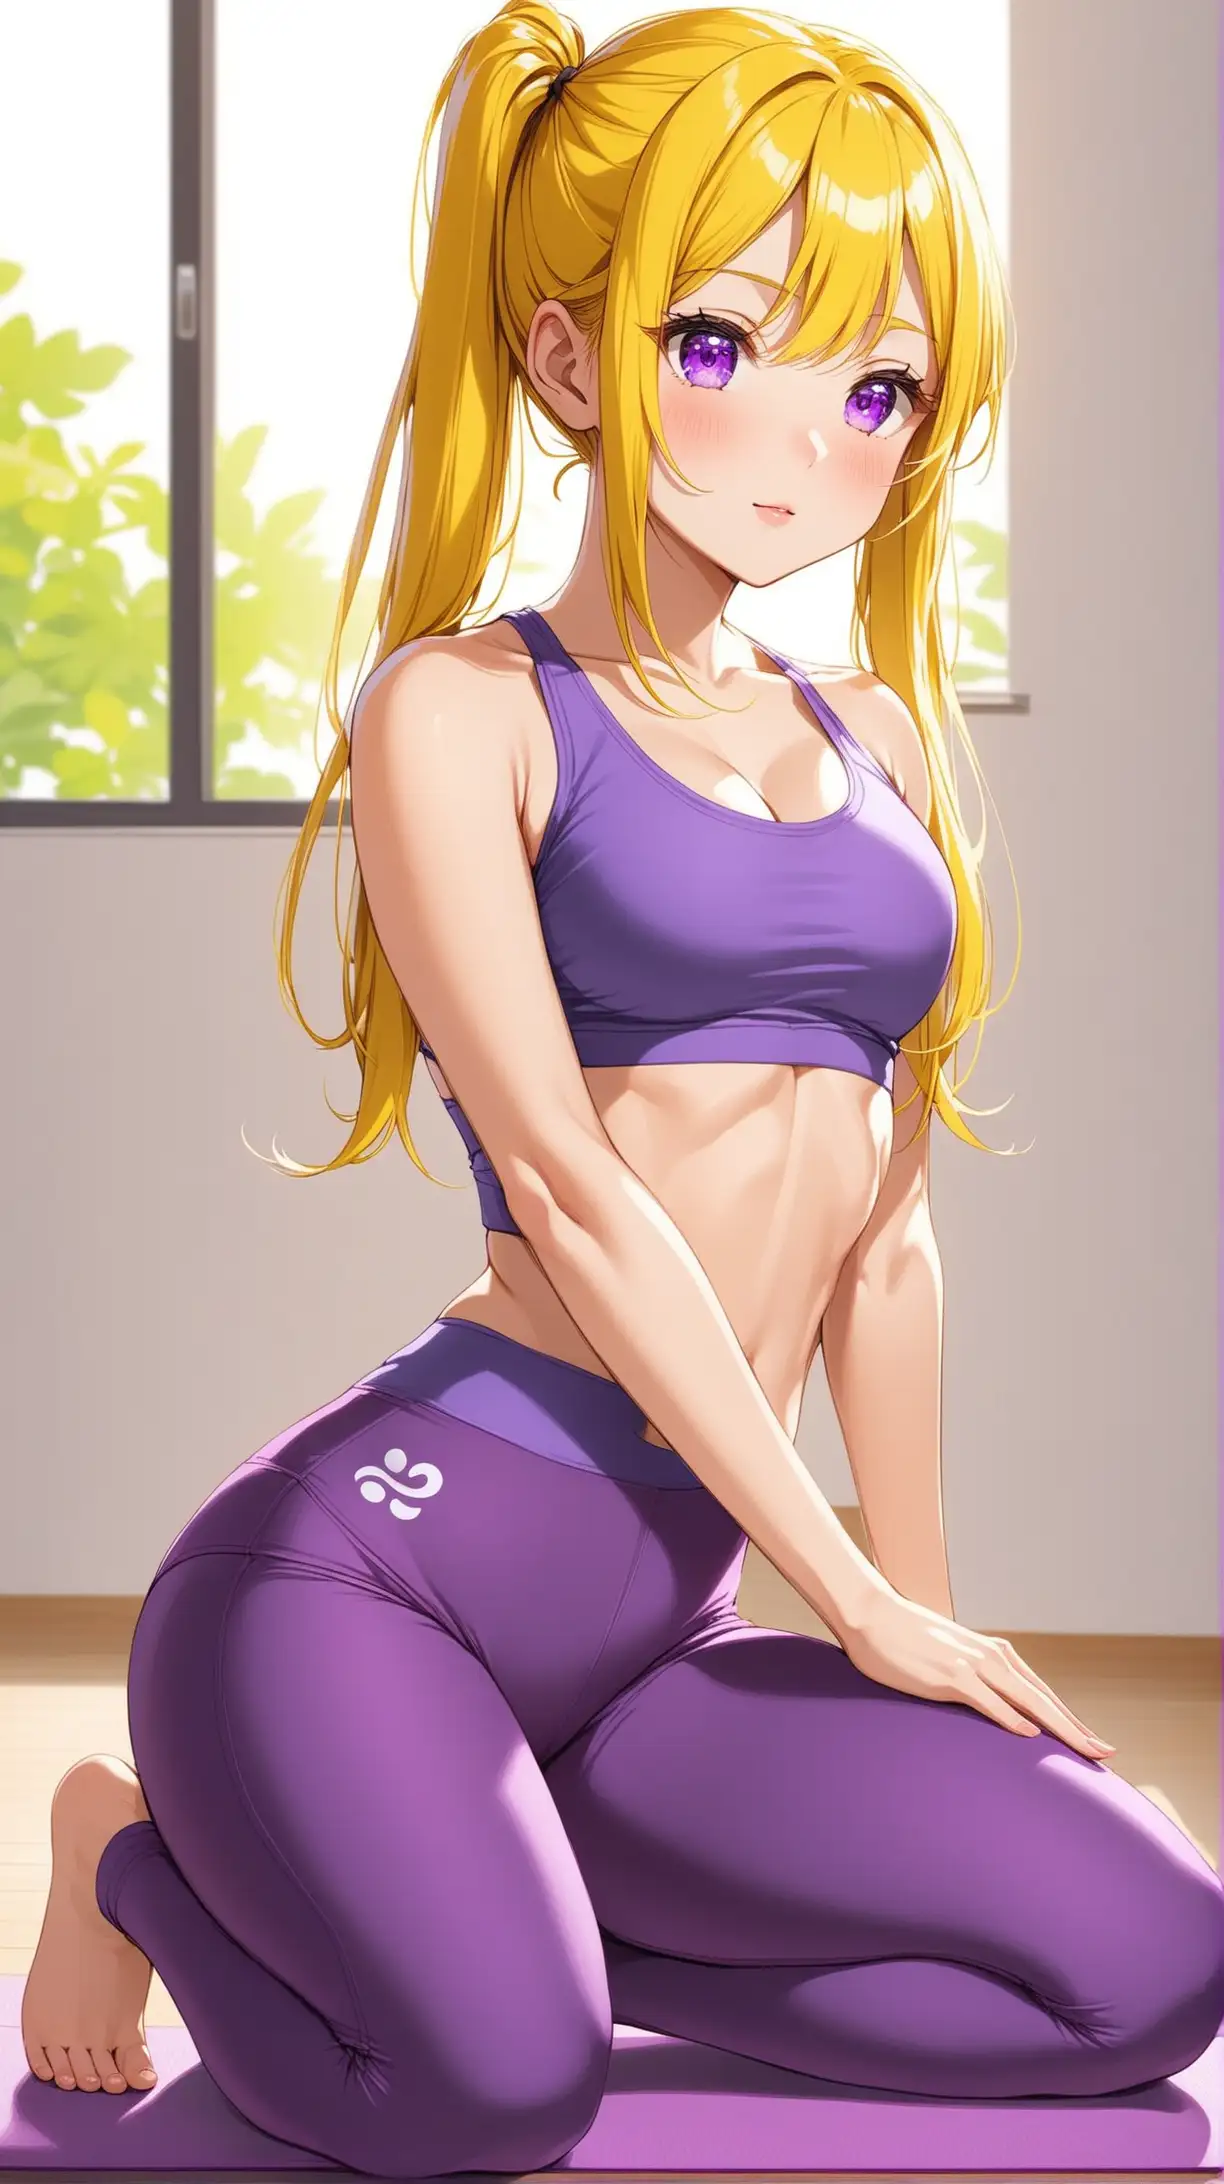 Girl with yellow pigtails, purple eyes, purple yoga pants